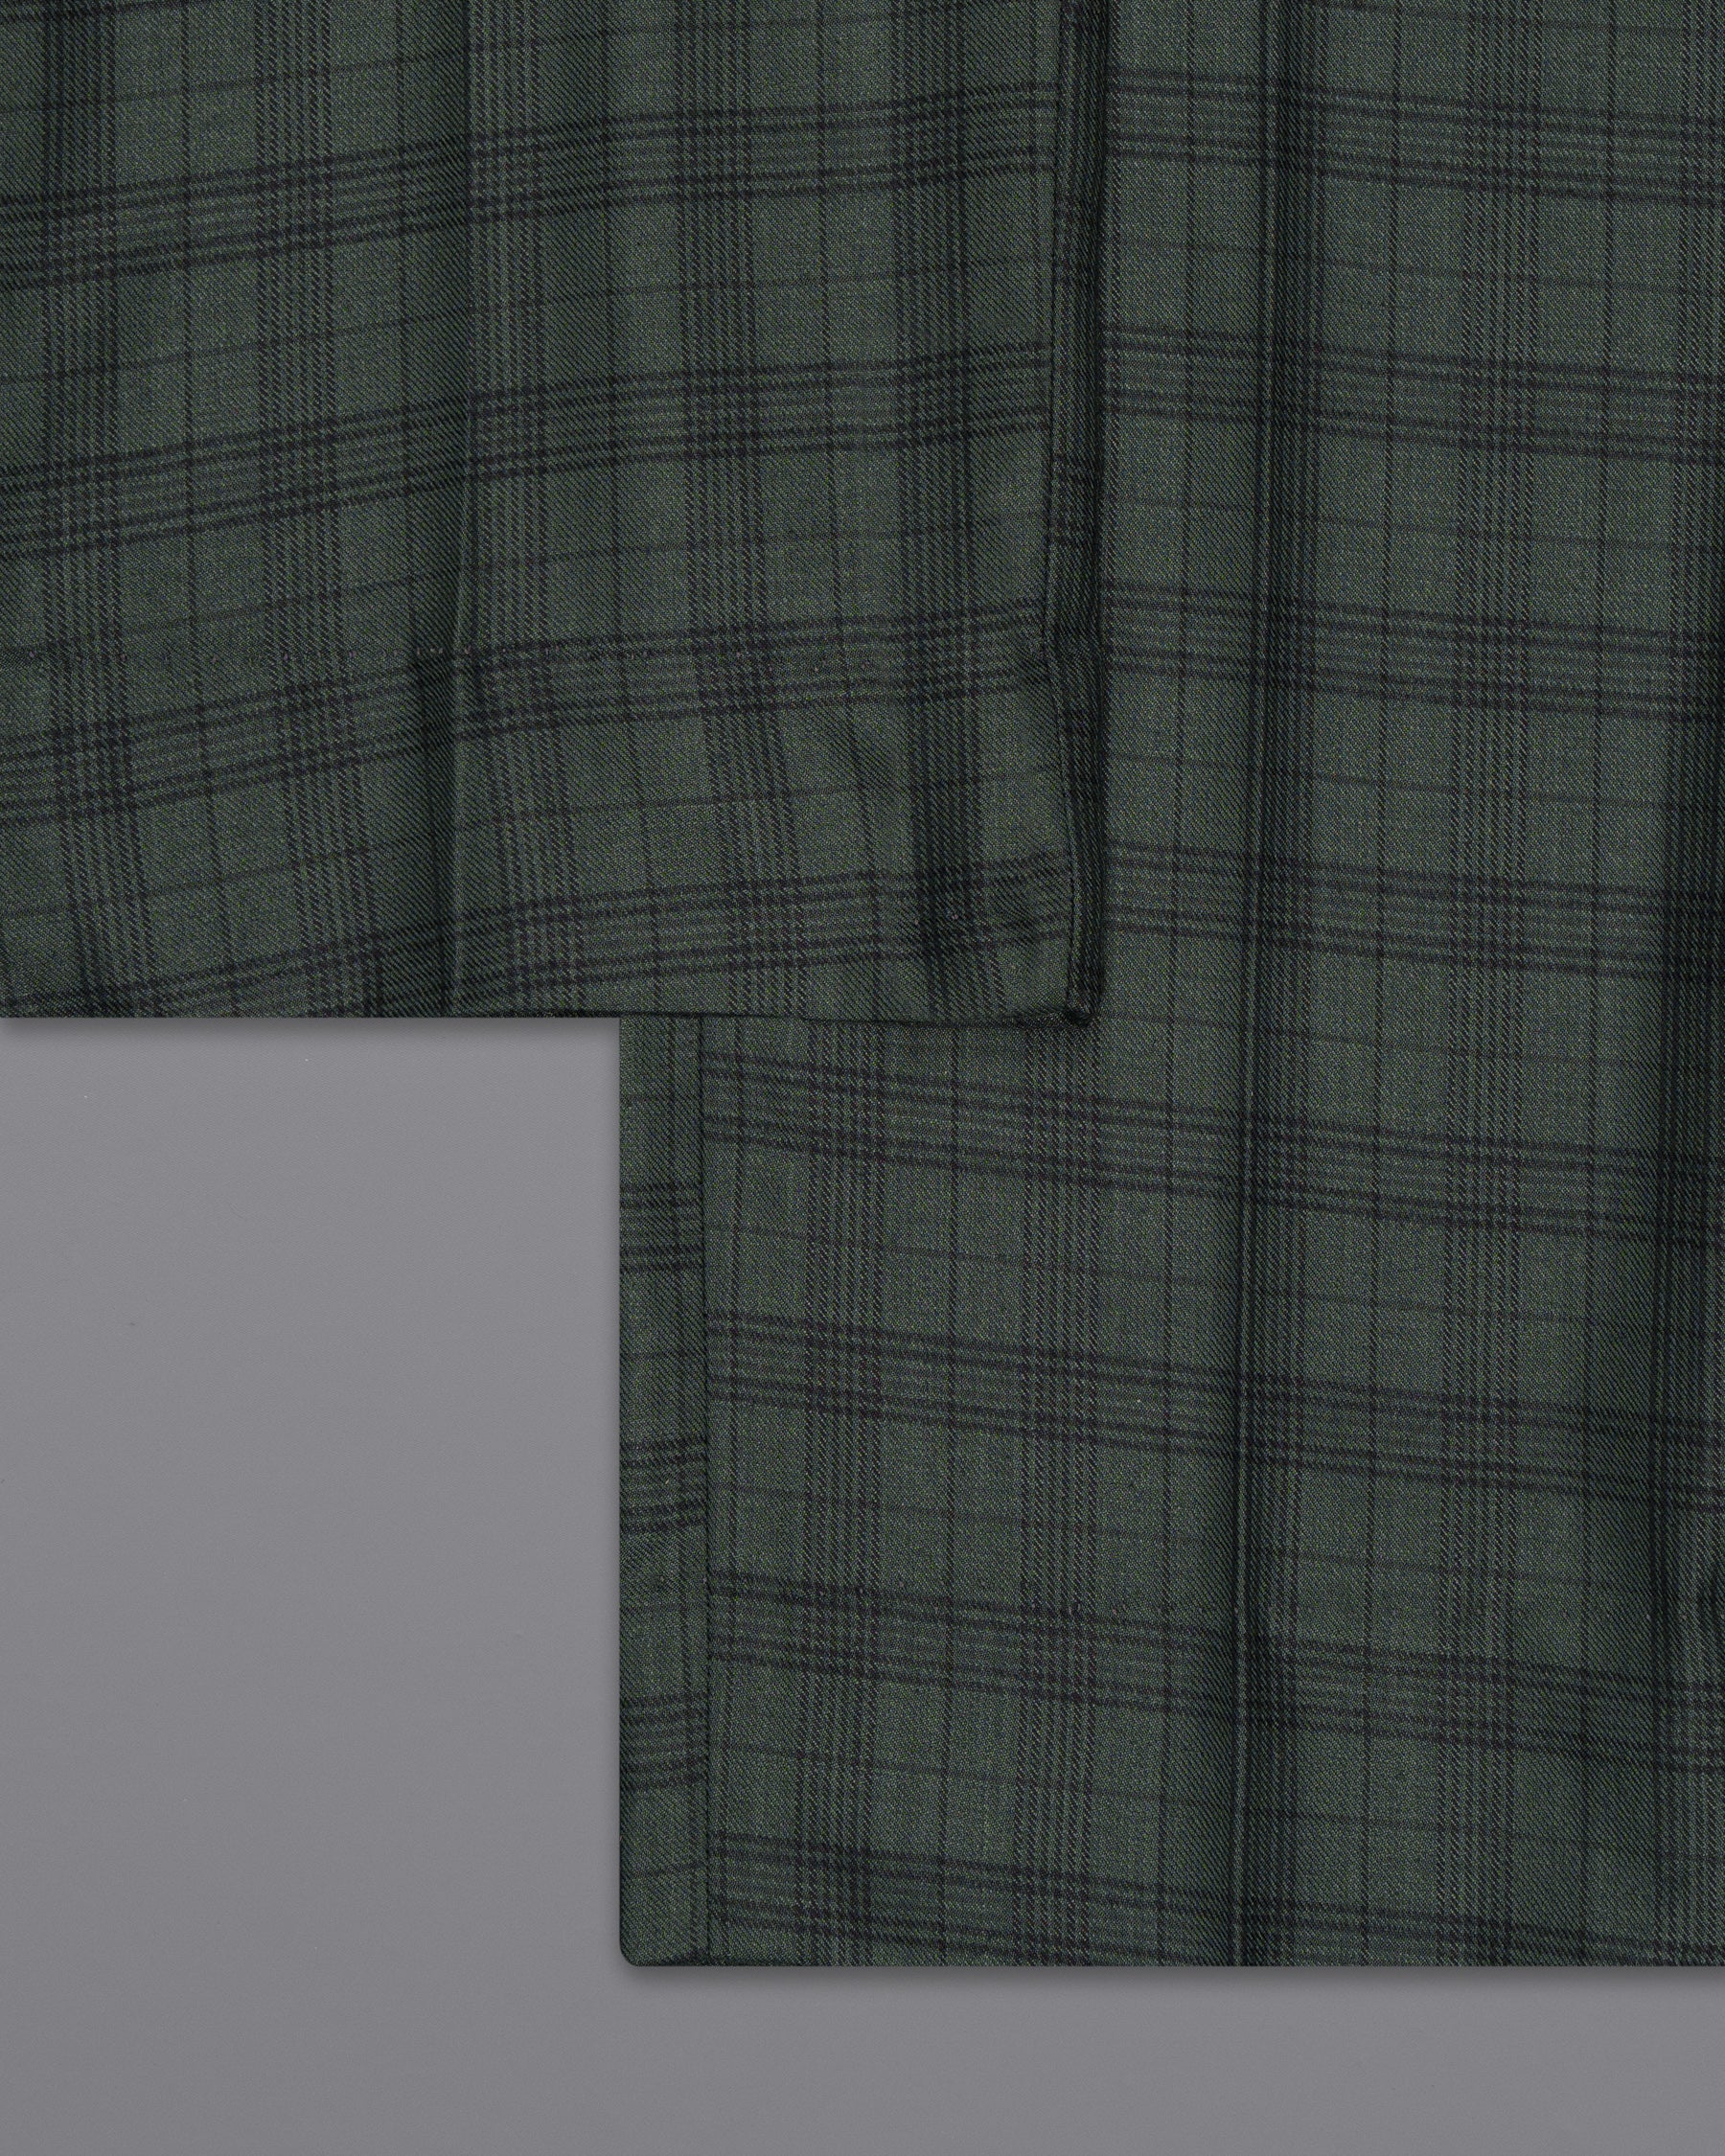 Timber Green Plaid Wool Rich Tuxedo Suit ST1417-BKL-36, ST1417-BKL-38, ST1417-BKL-40, ST1417-BKL-42, ST1417-BKL-44, ST1417-BKL-46, ST1417-BKL-48, ST1417-BKL-50, ST1417-BKL-52, ST1417-BKL-54, ST1417-BKL-56, ST1417-BKL-58, ST1417-BKL-60